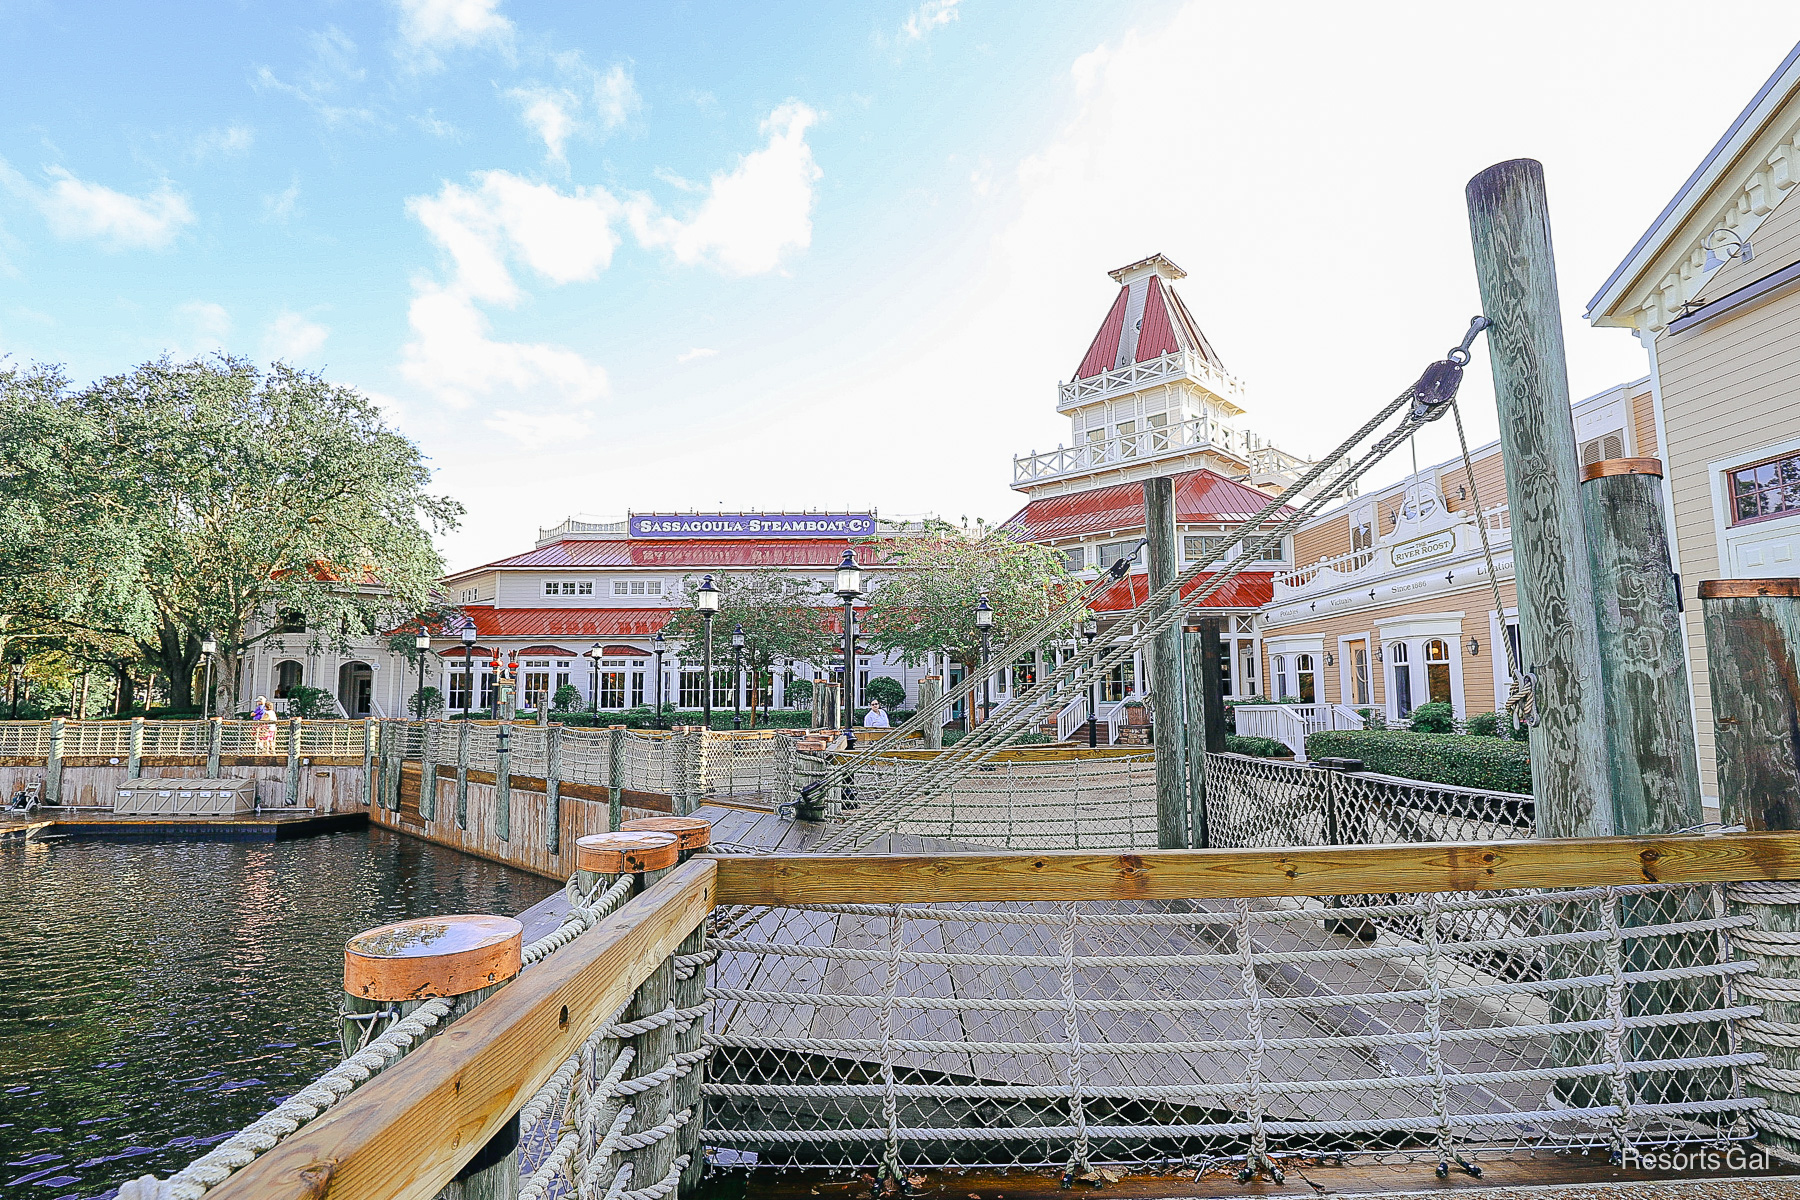 a scenic photo of the Port Orleans Riverside lobby area